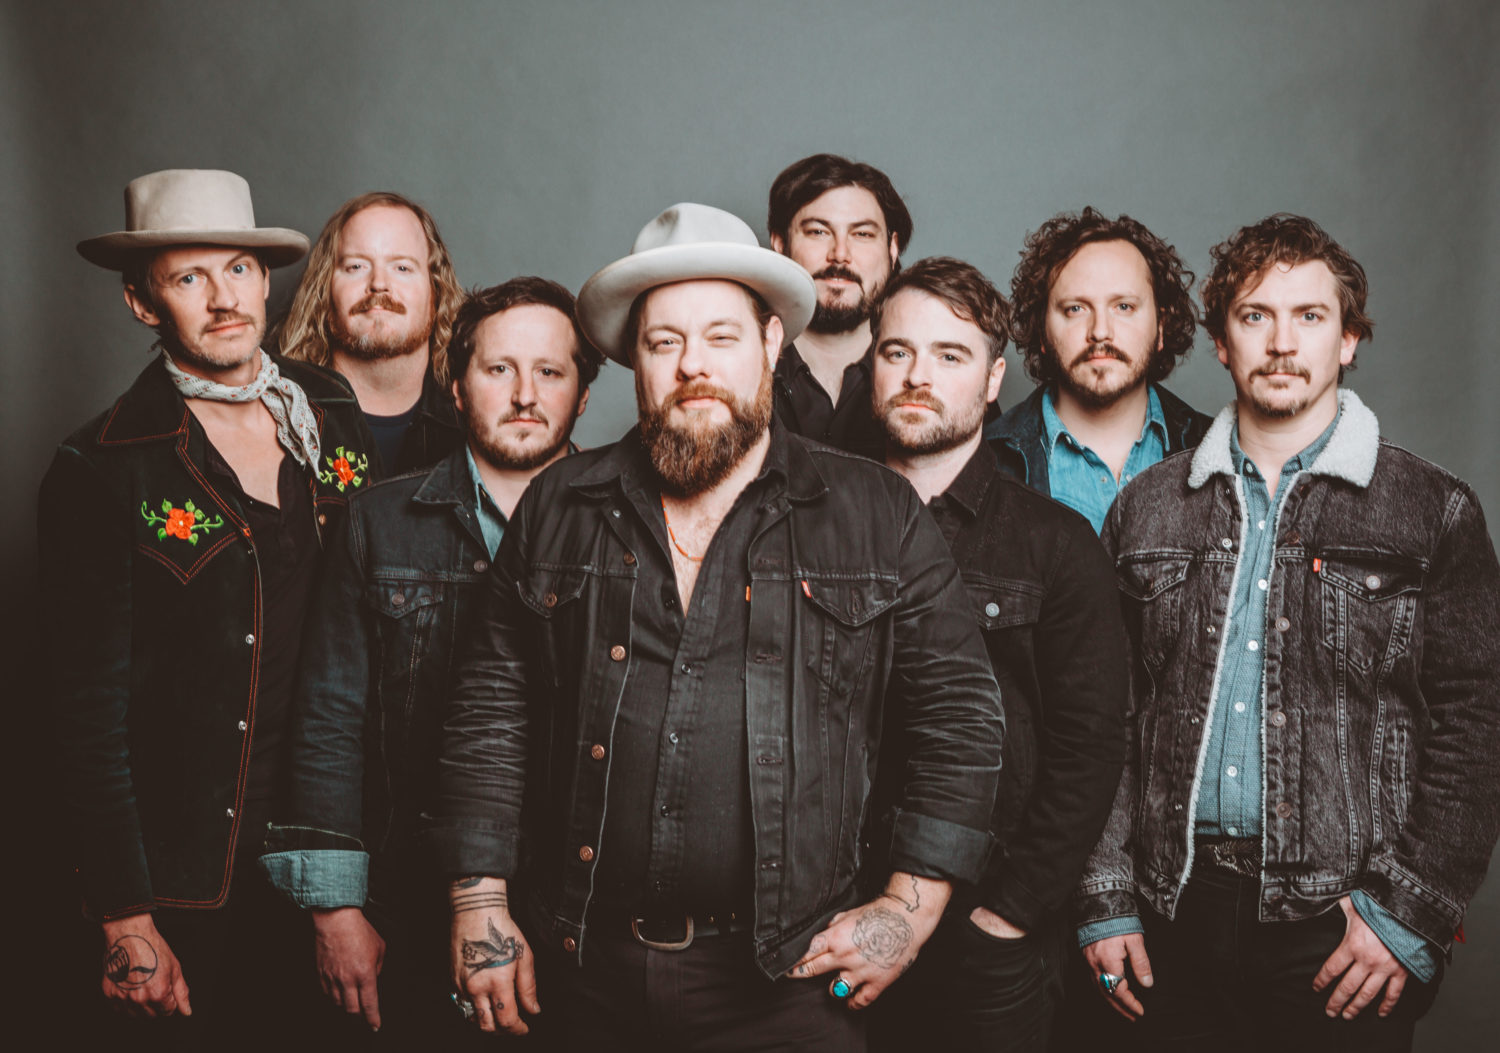 NATHANIEL RATELIFF & THE NIGHT SWEATS SHARE THE VIDEO FOR "HEY MAMA